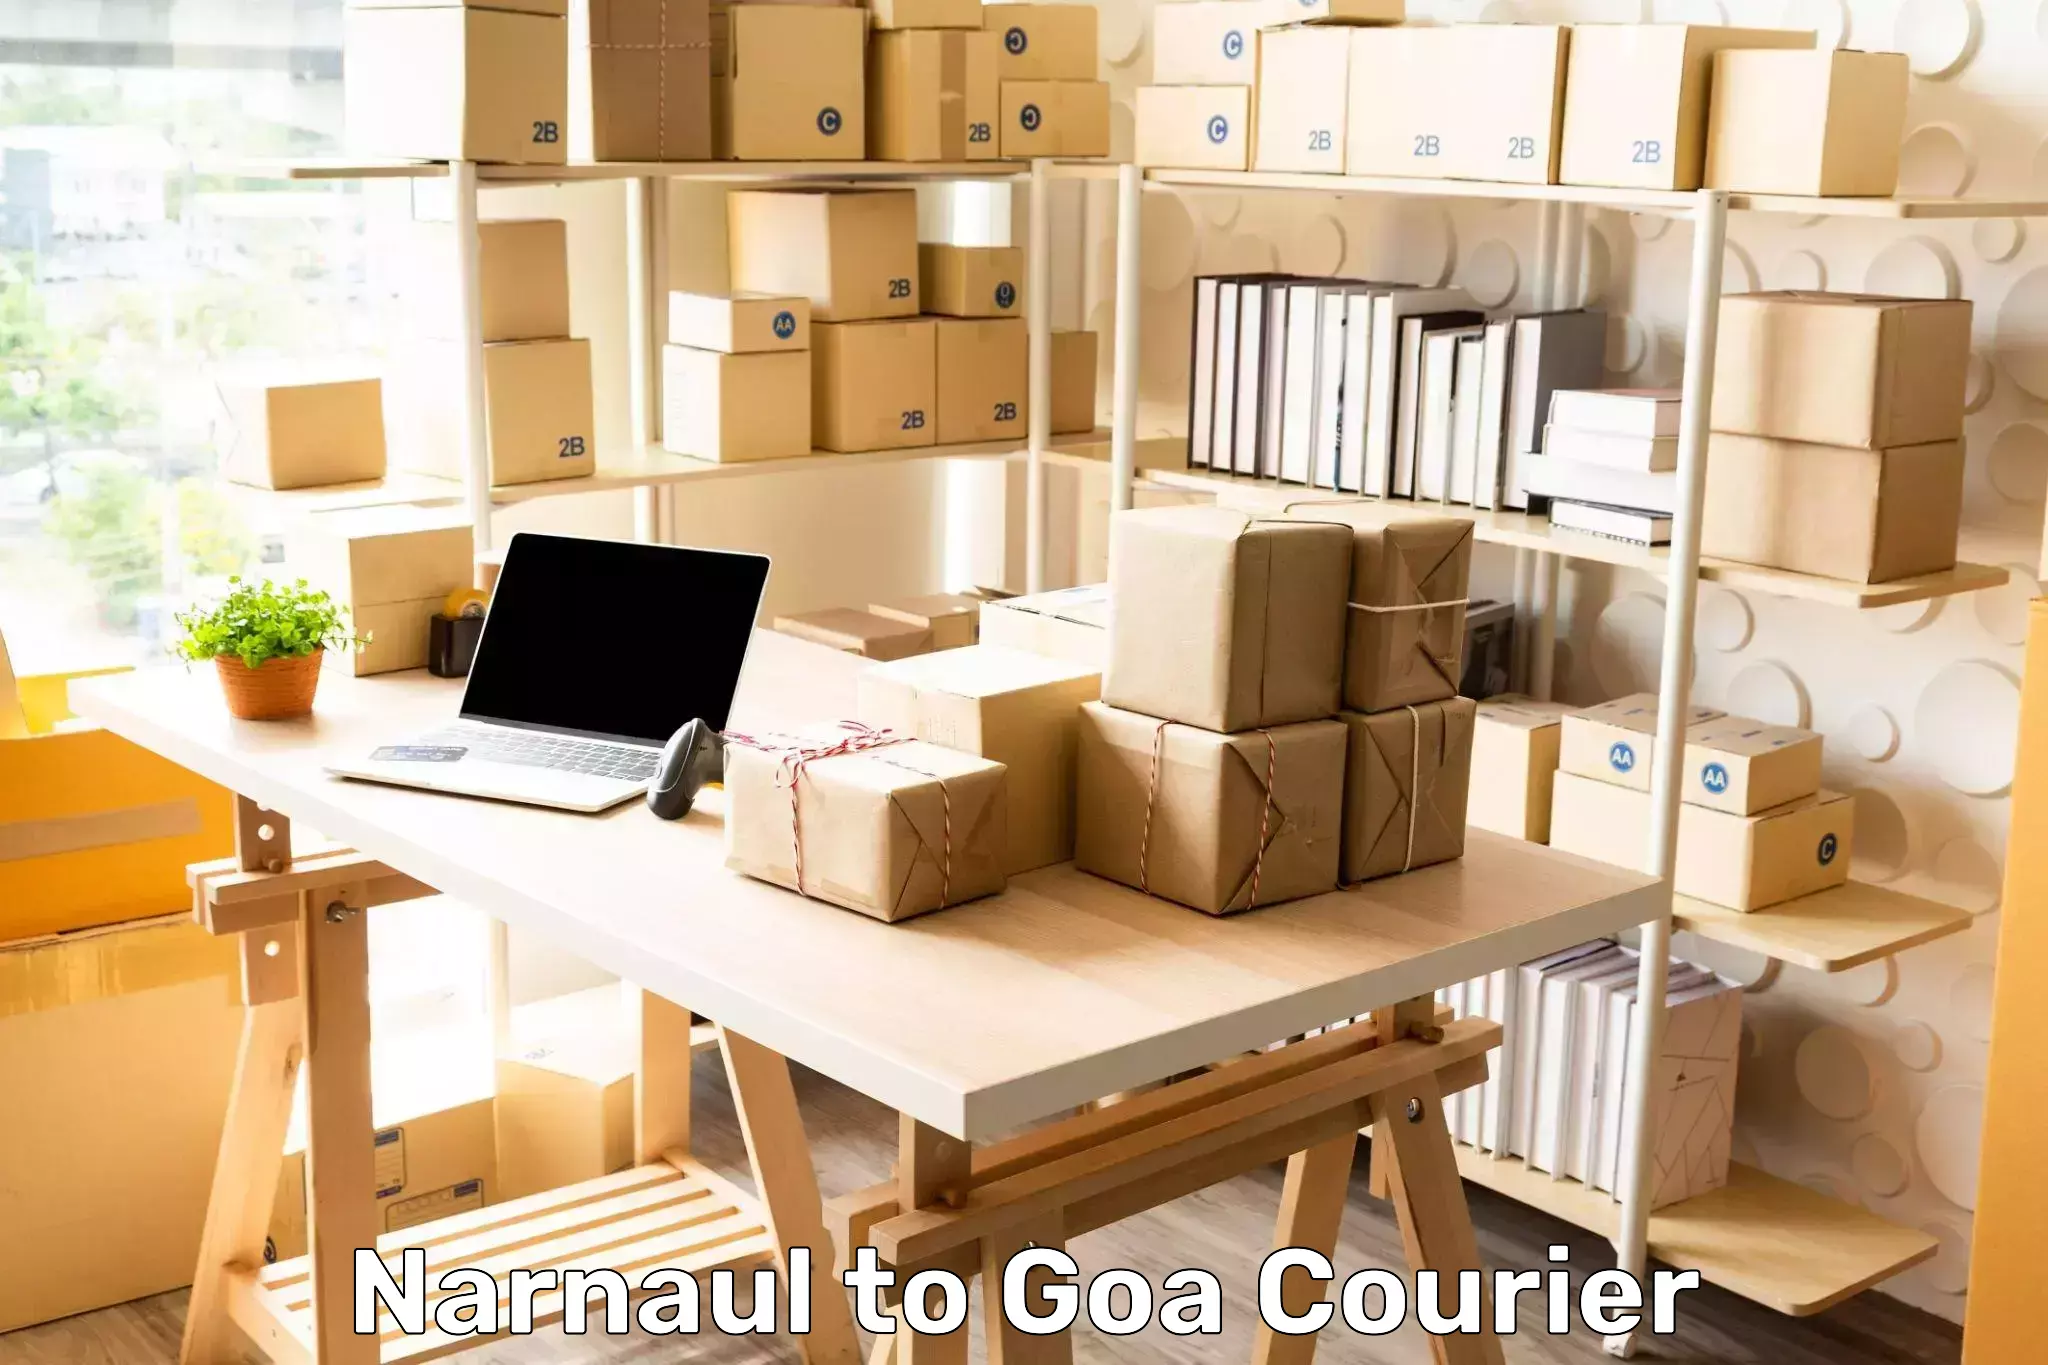 24-hour courier service Narnaul to IIT Goa